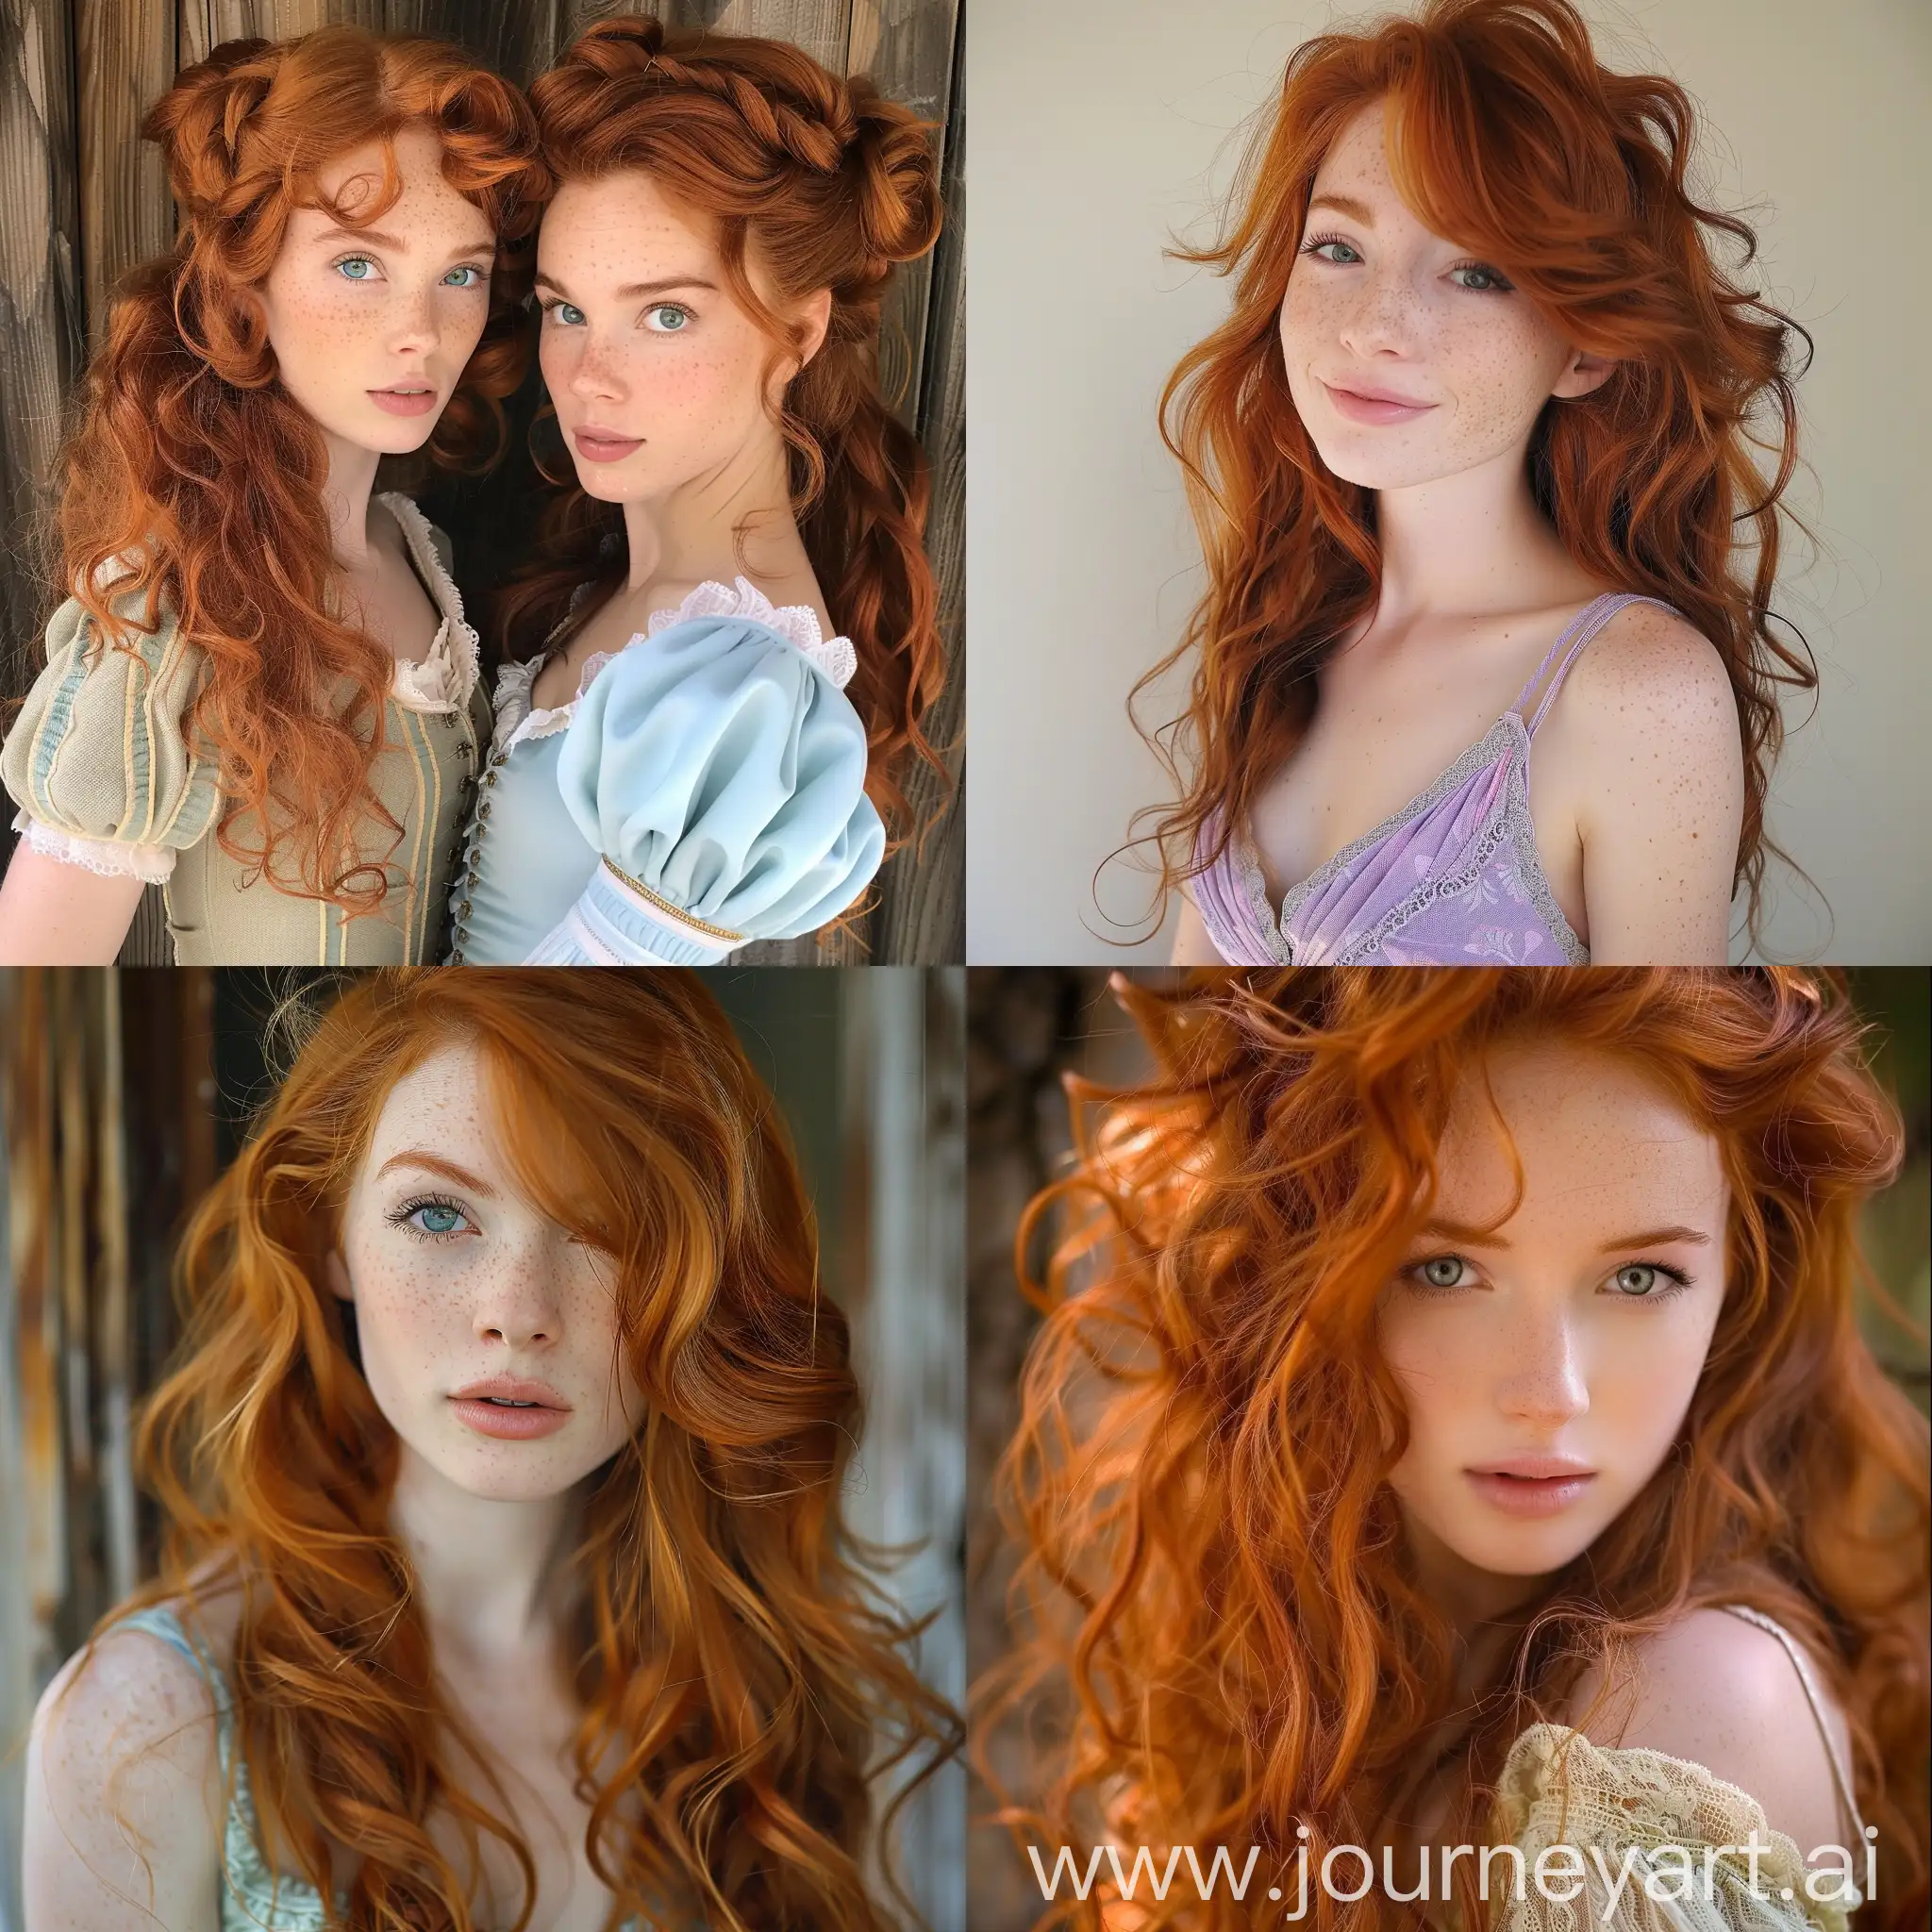 disney style redhead young women